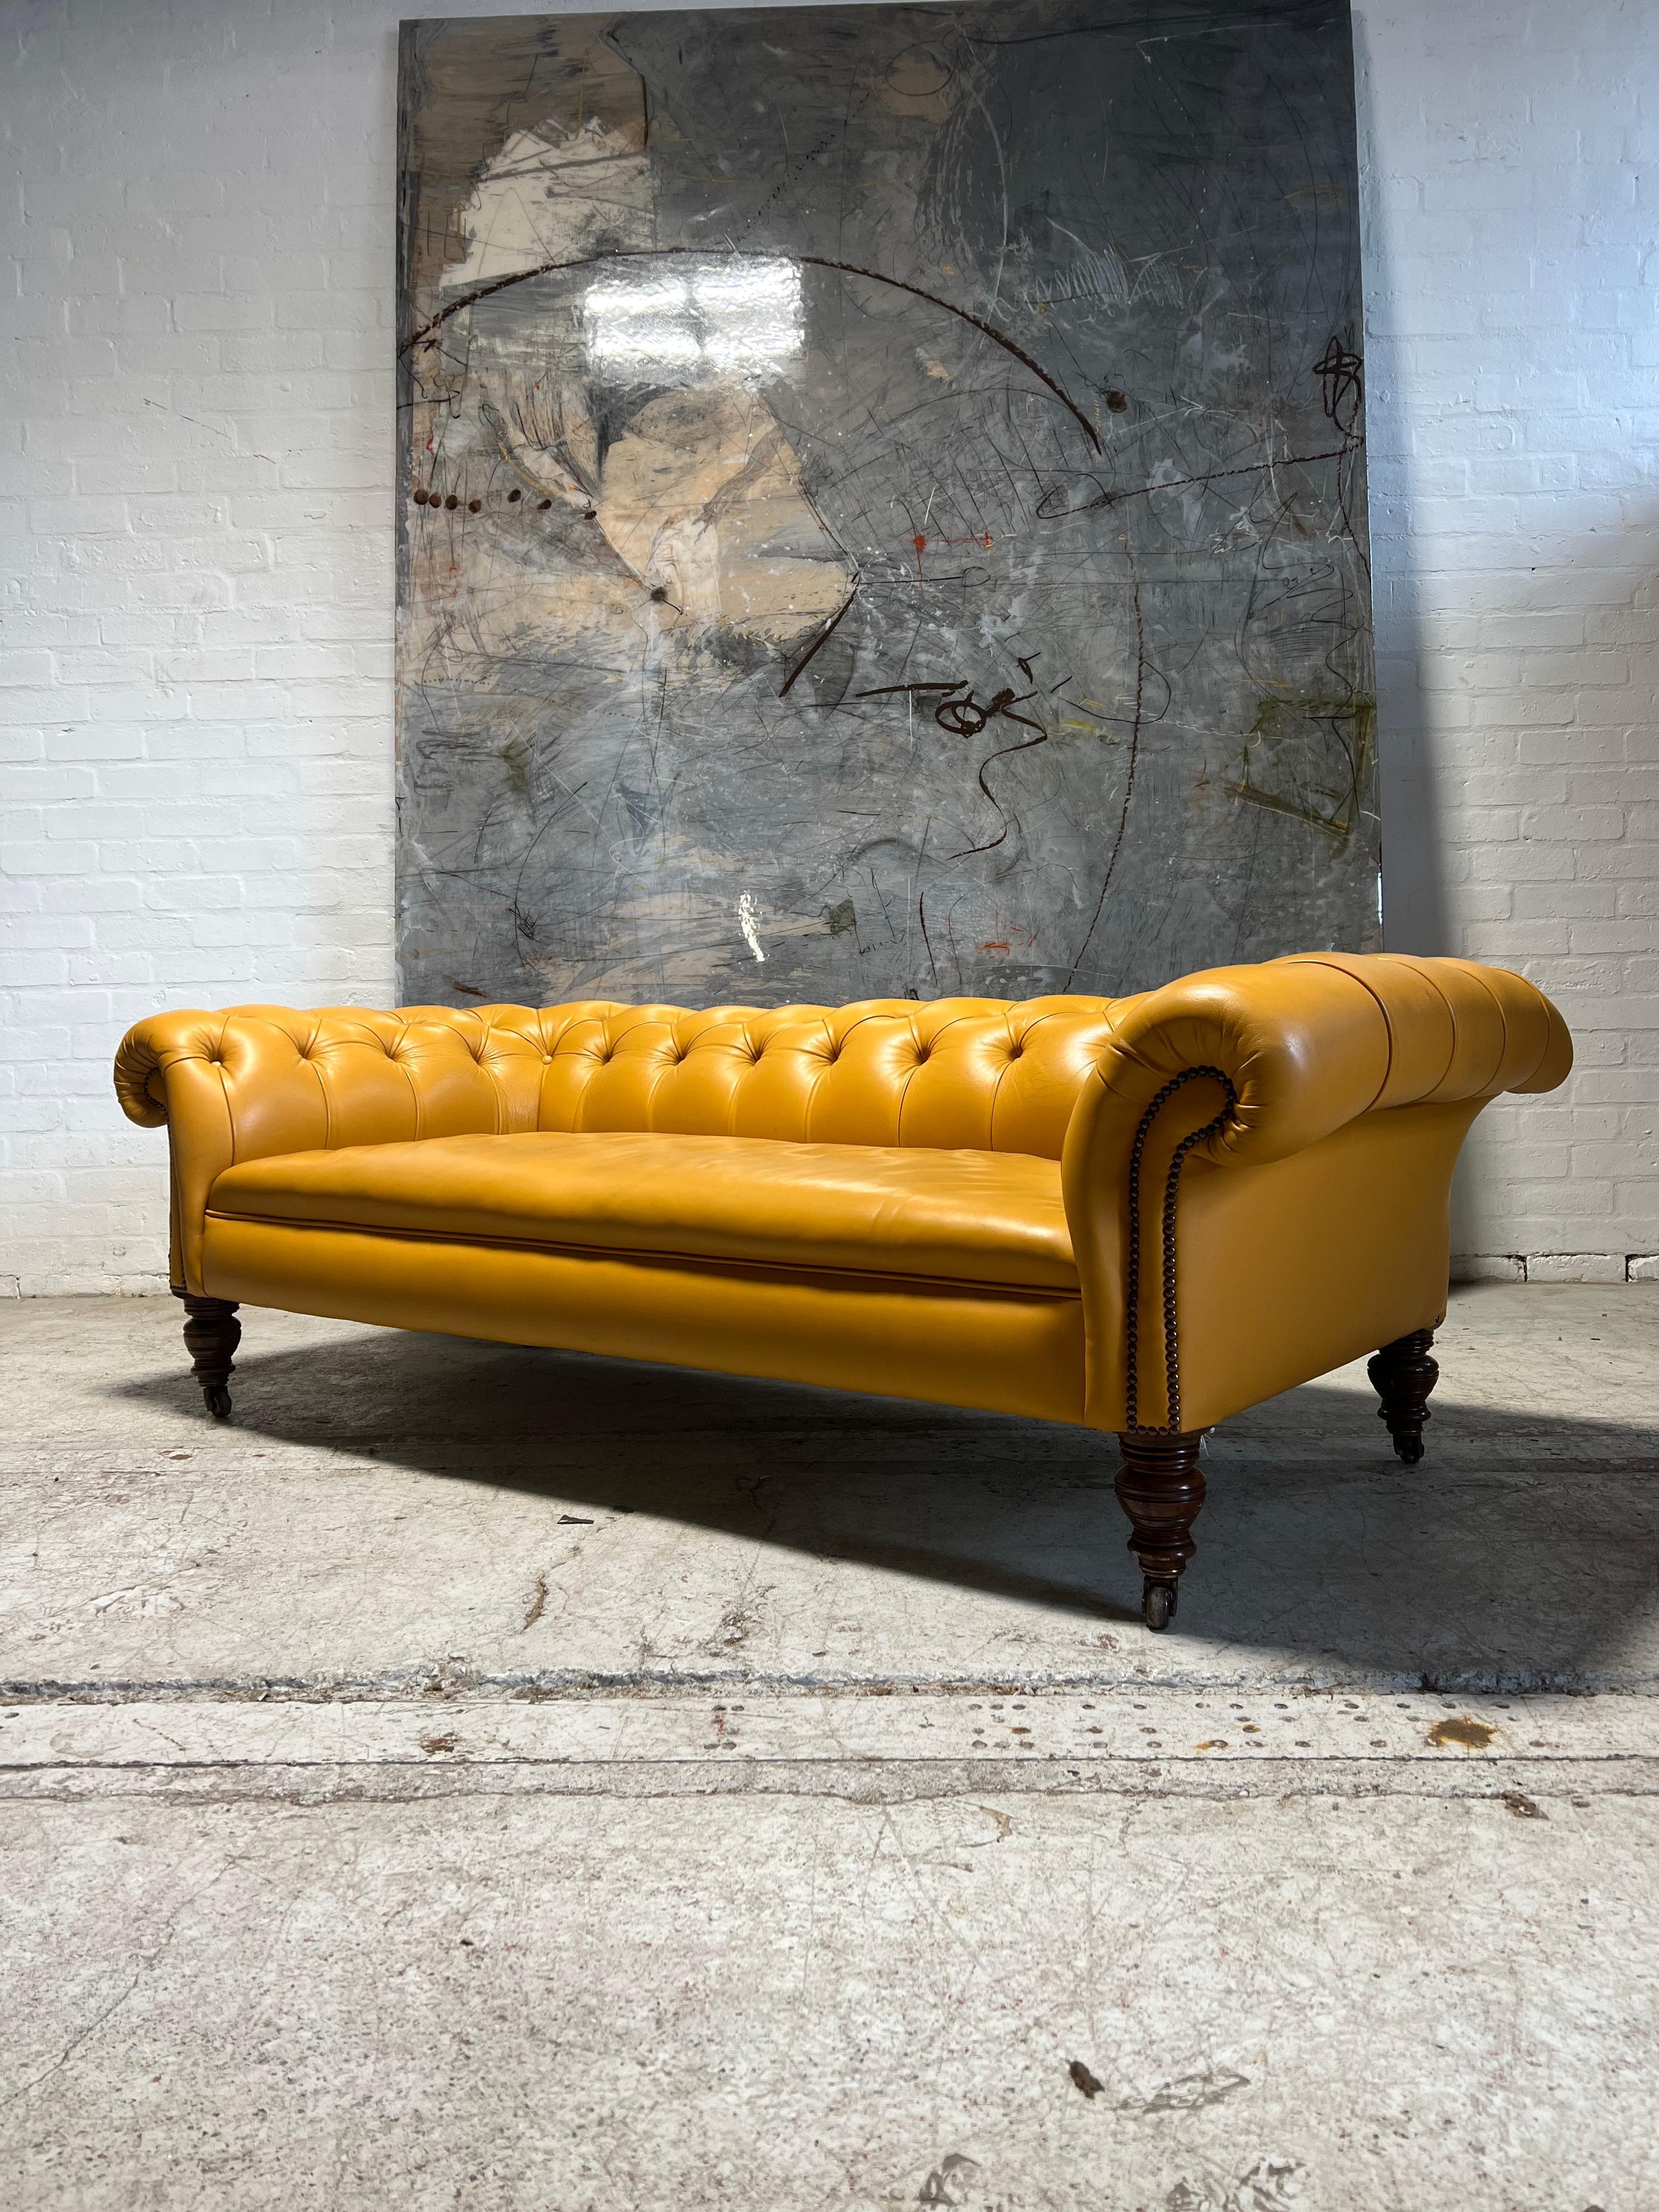 British Antique 19thC Chesterfield Sofa in Stunning Sunflower Yellow Leather